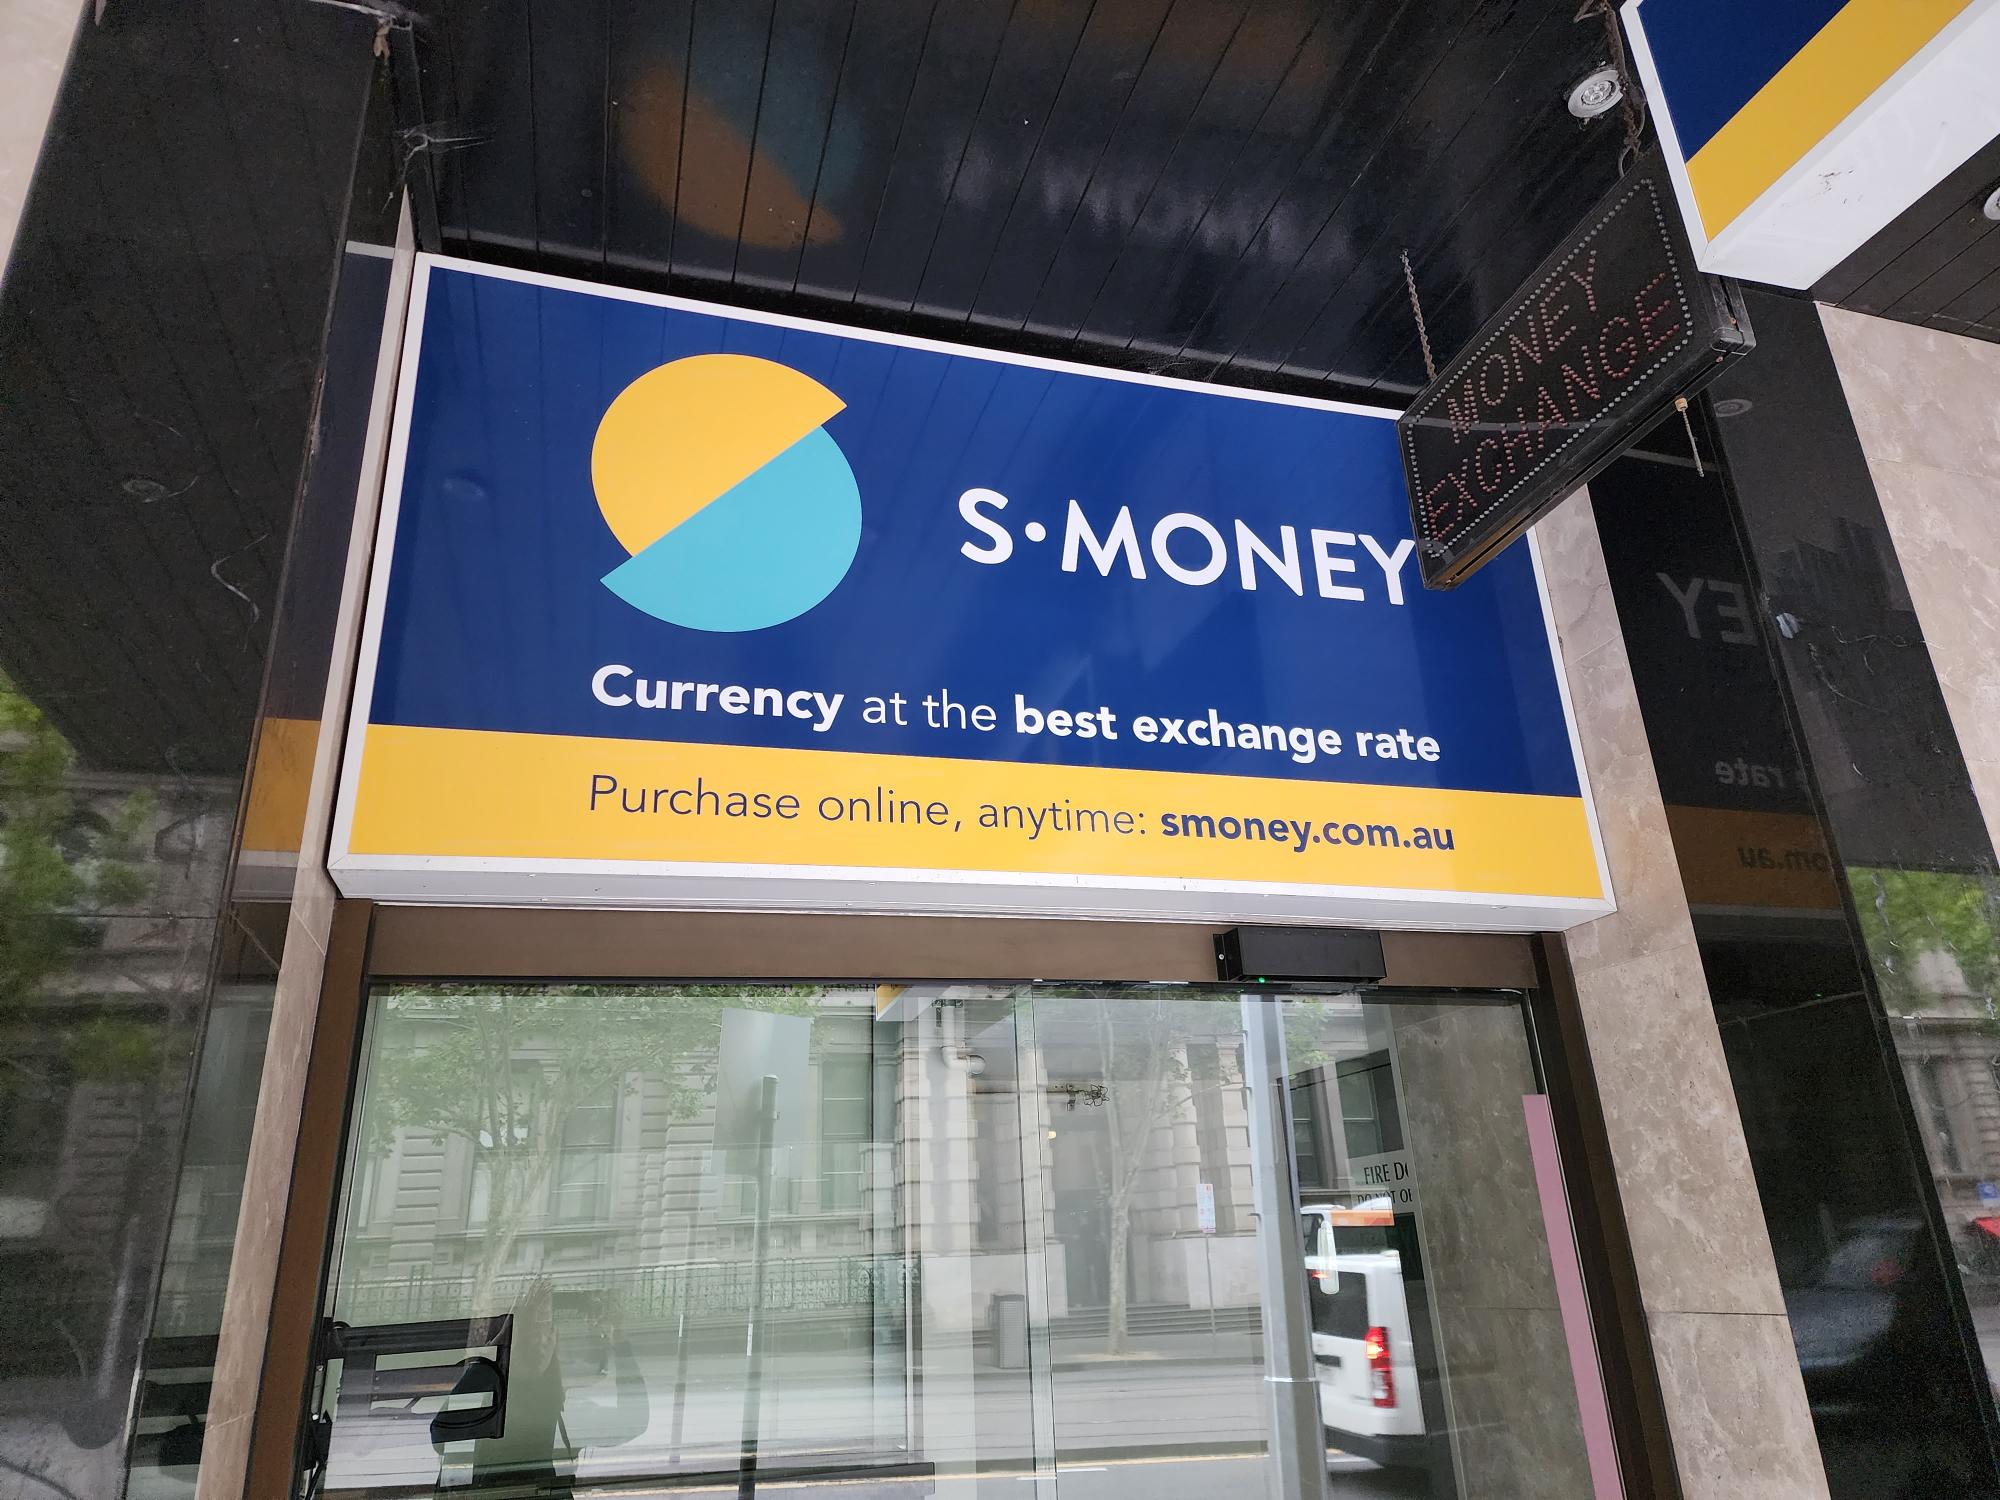 Melbourne currency to buy for travel money.